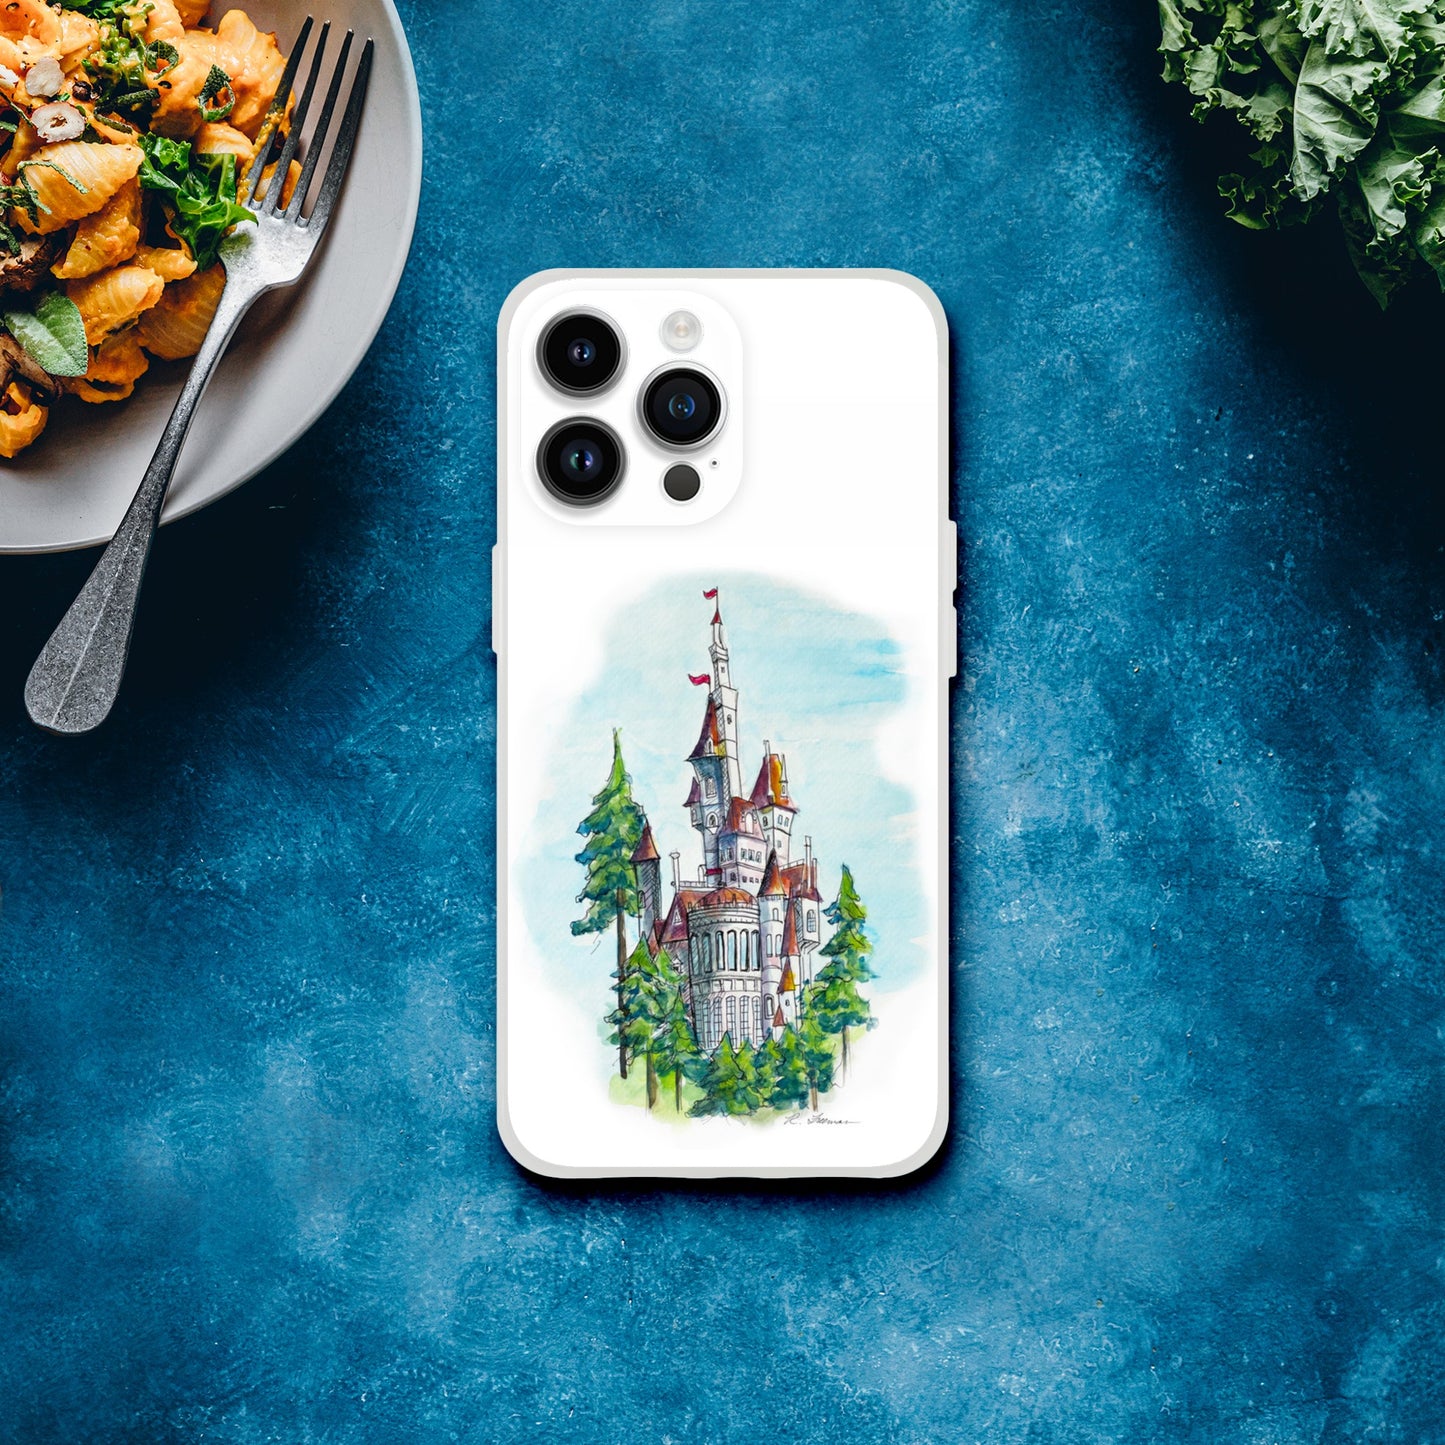 Beauty and The Beast's Castle - Flexi case